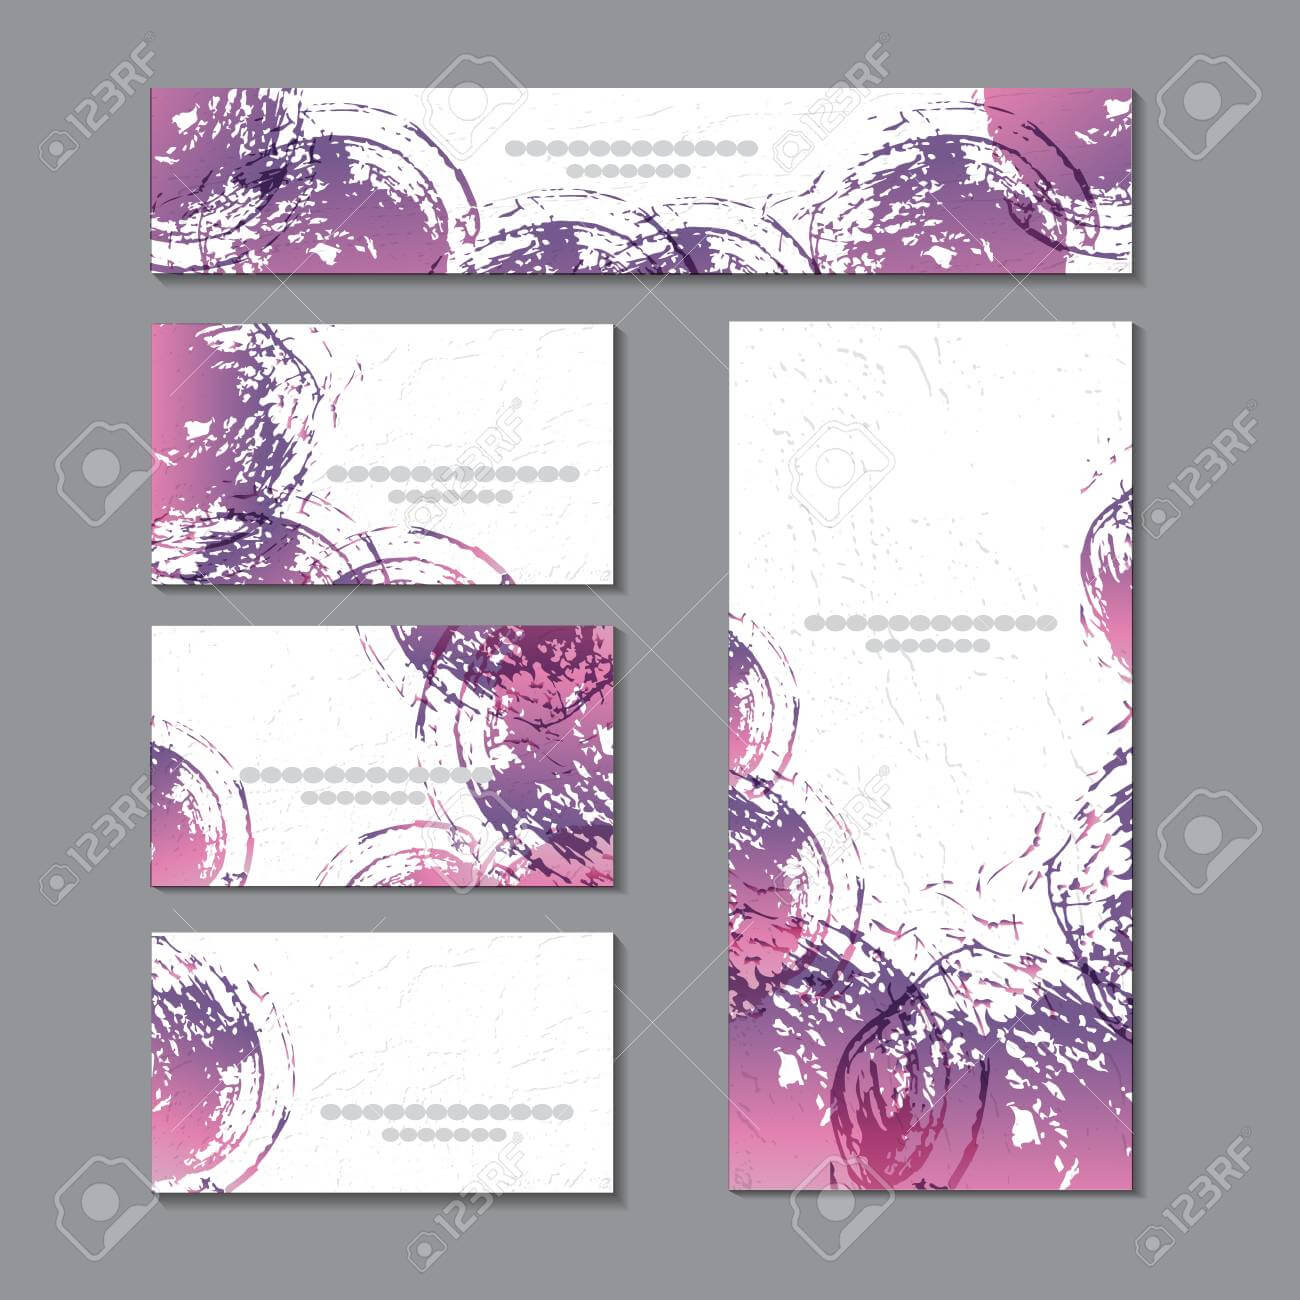 Cute Templates With Abstract Graphics.for Romance And Design,.. Inside Advertising Cards Templates